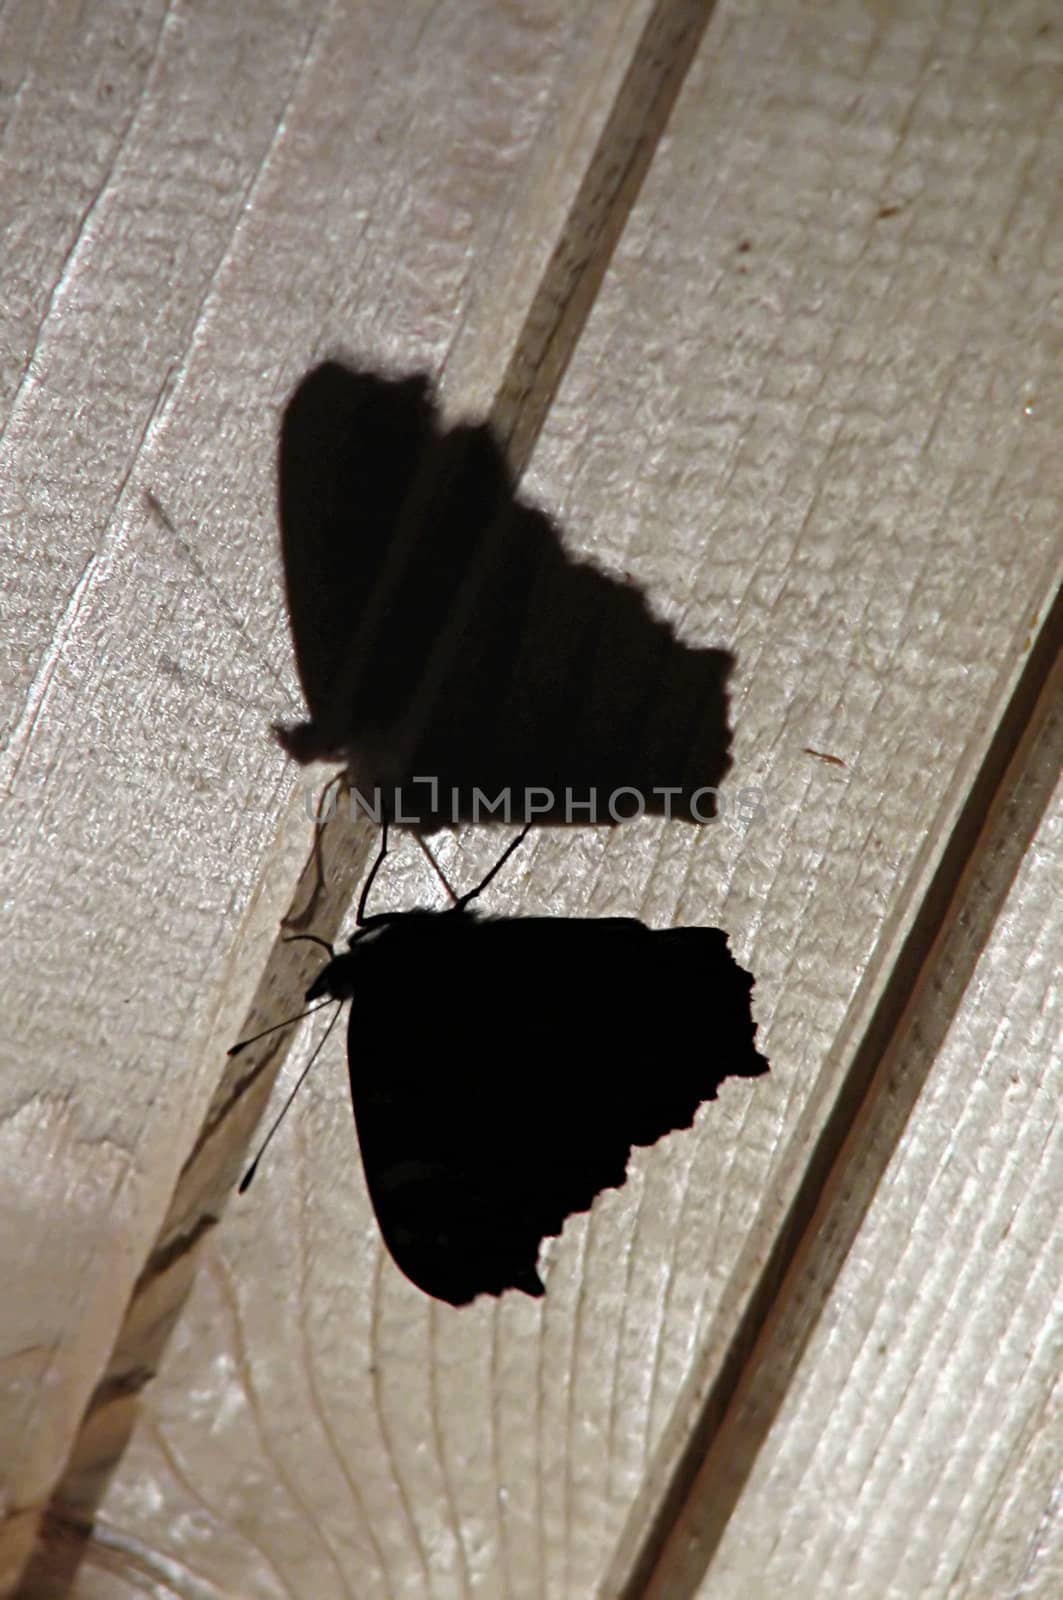 The butterfly's silhouette and it's shadow